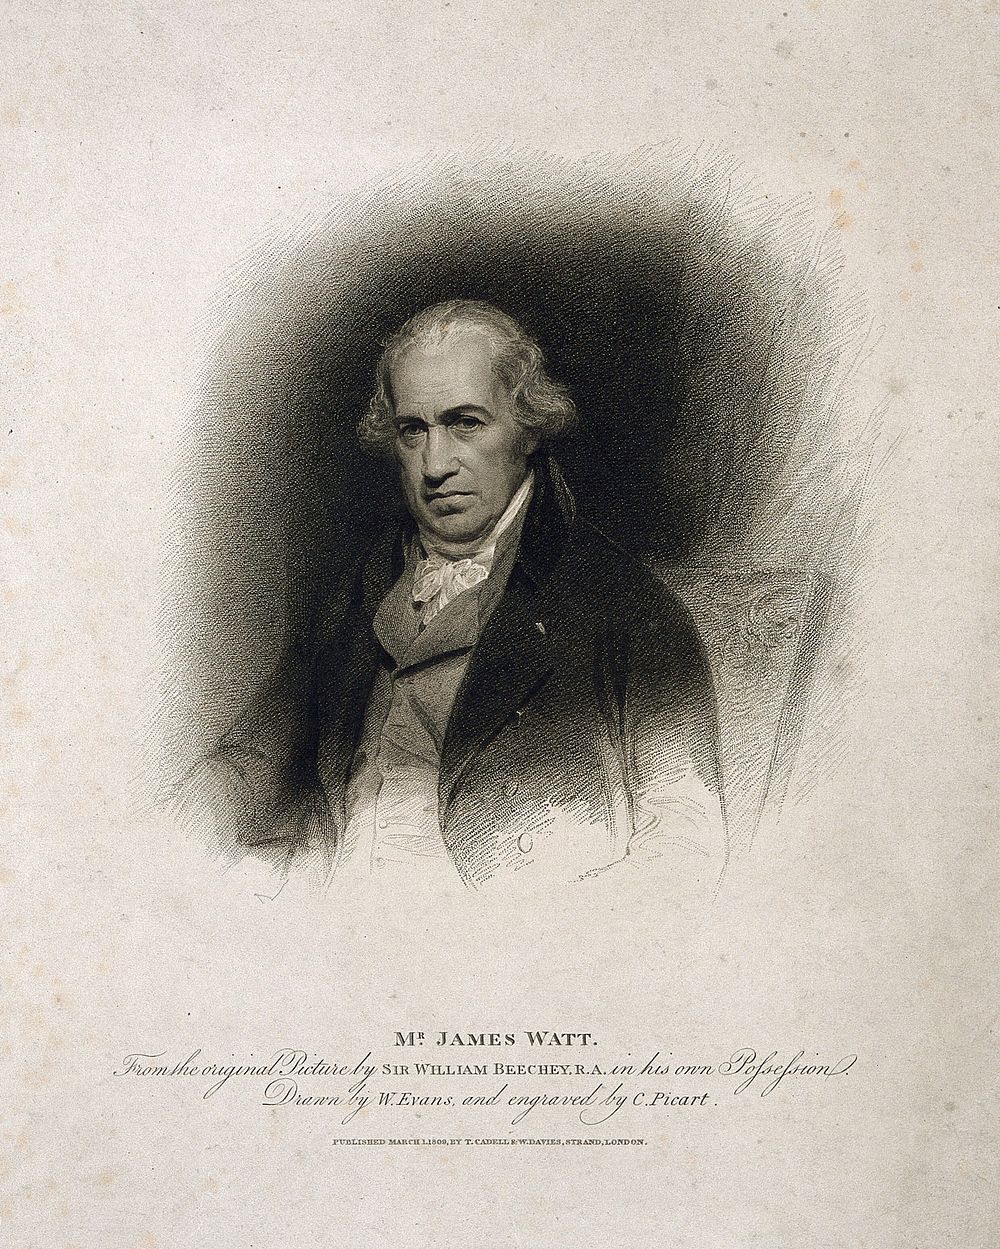 James Watt. Stipple engraving by C. Picart, 1809, after W. Evans after Sir W. Beechey.